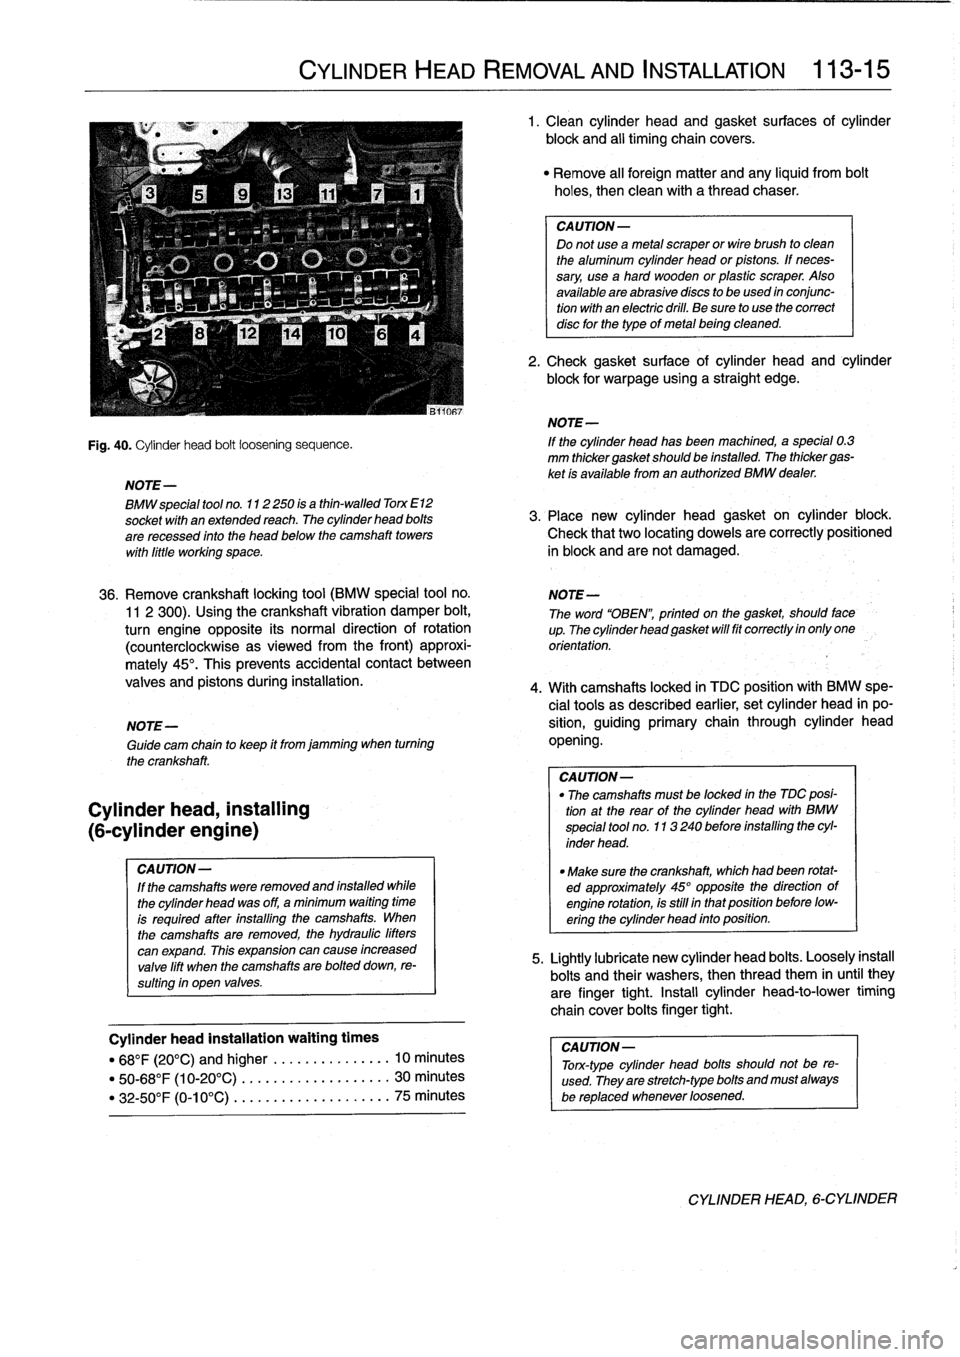 BMW 318i 1995 E36 Workshop Manual 
NOTE-

Cylinder
head,
installing

(6-cylinder
engine)

CAUTION-

If
the
camshafts
were
removed
and
installed
while

the
cylinder
head
was
off,
a
minimum
waiting
time

is
required
after
ínstalling
th